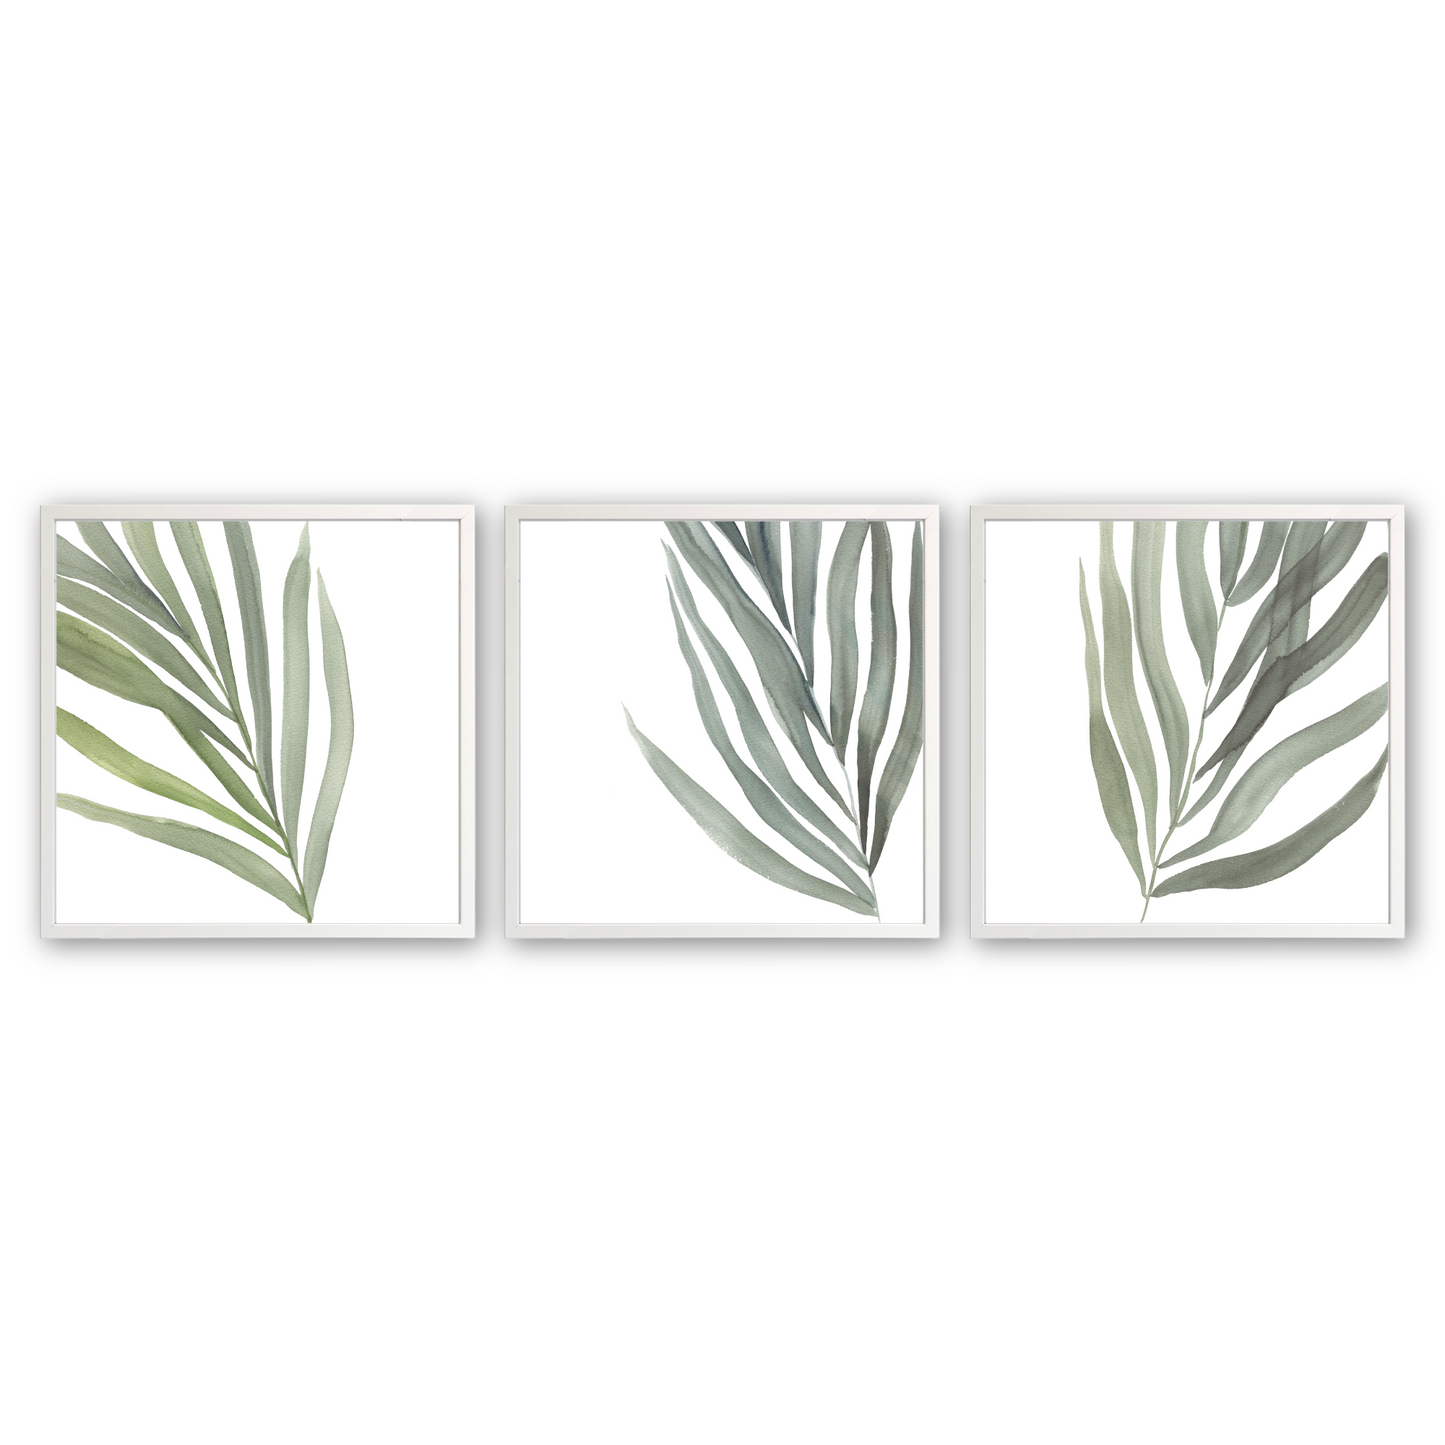 [color:Opaque White], Picture of the set of 3 prints of ferns in a white frame